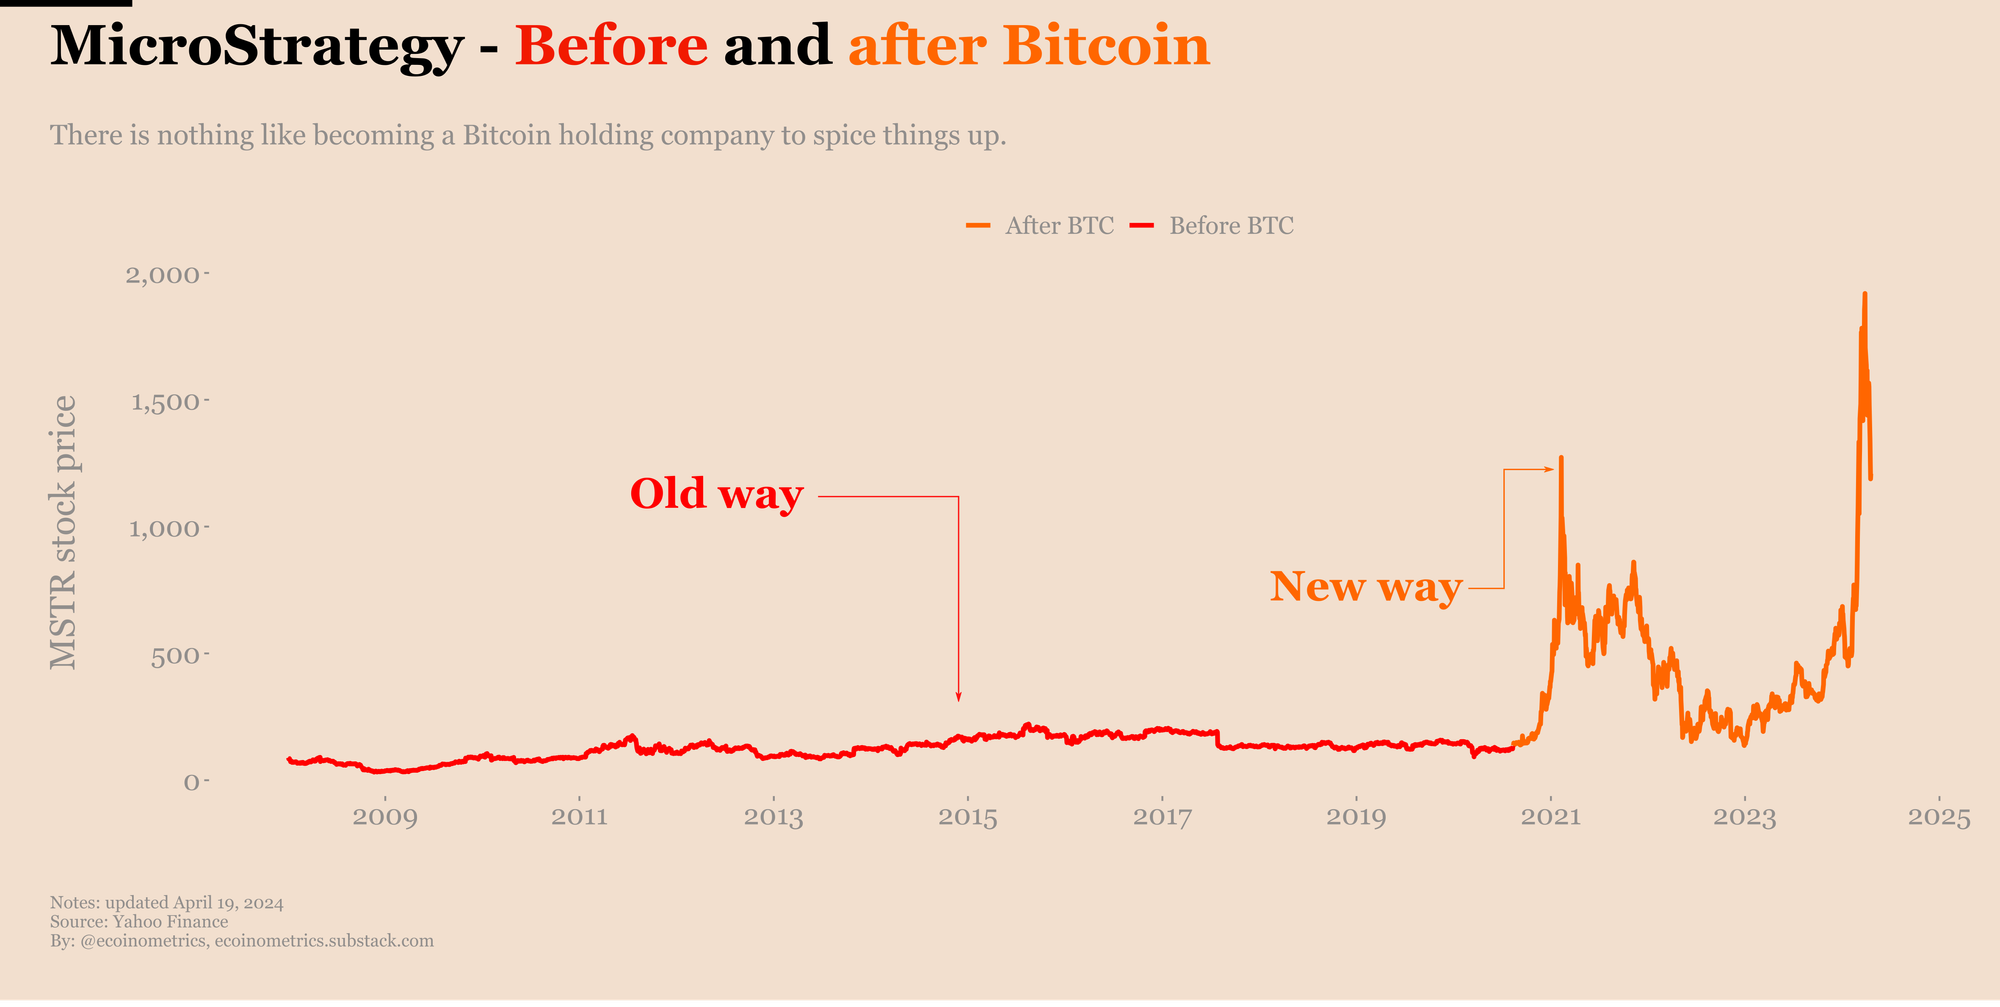 MicroStrategy stock price before and after they invested on Bitcoin.